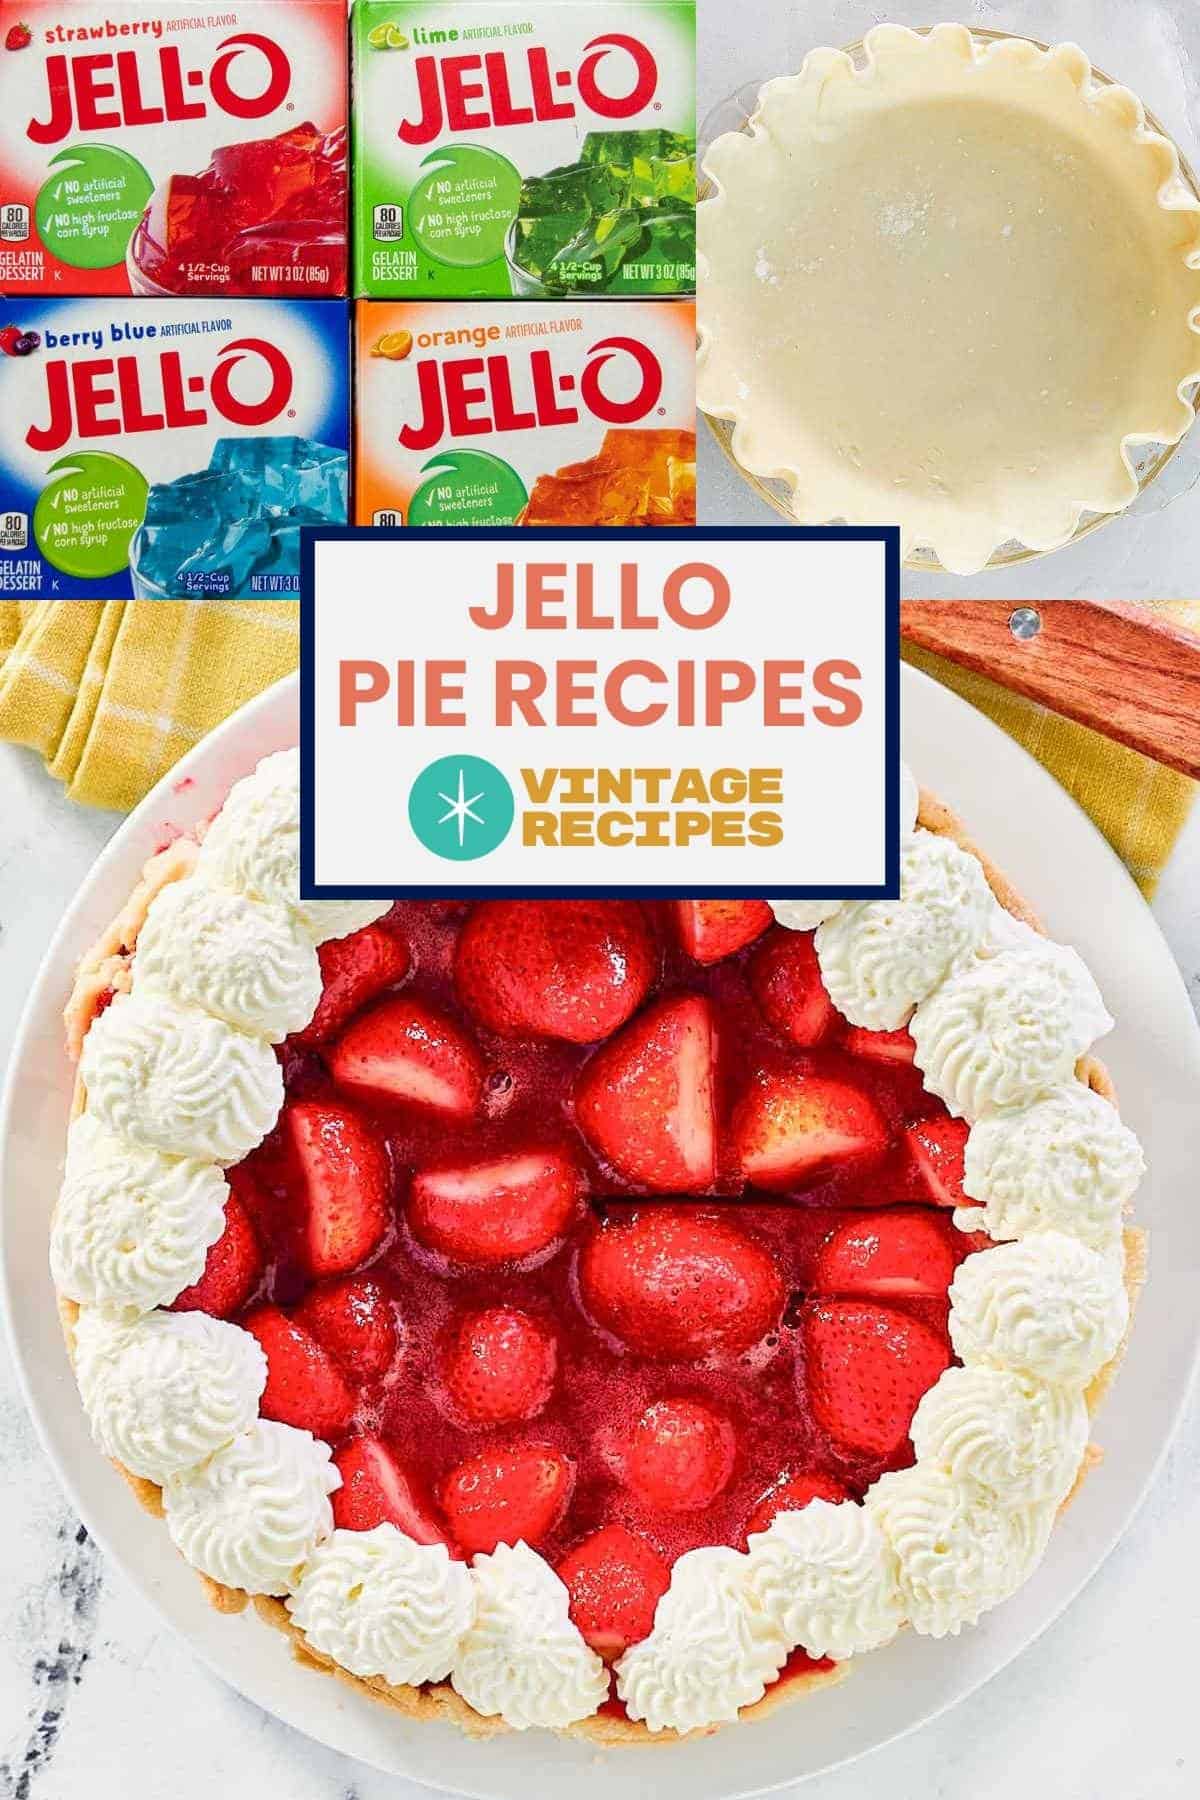 Boxes of Jello, pie shell, and strawberry pie.